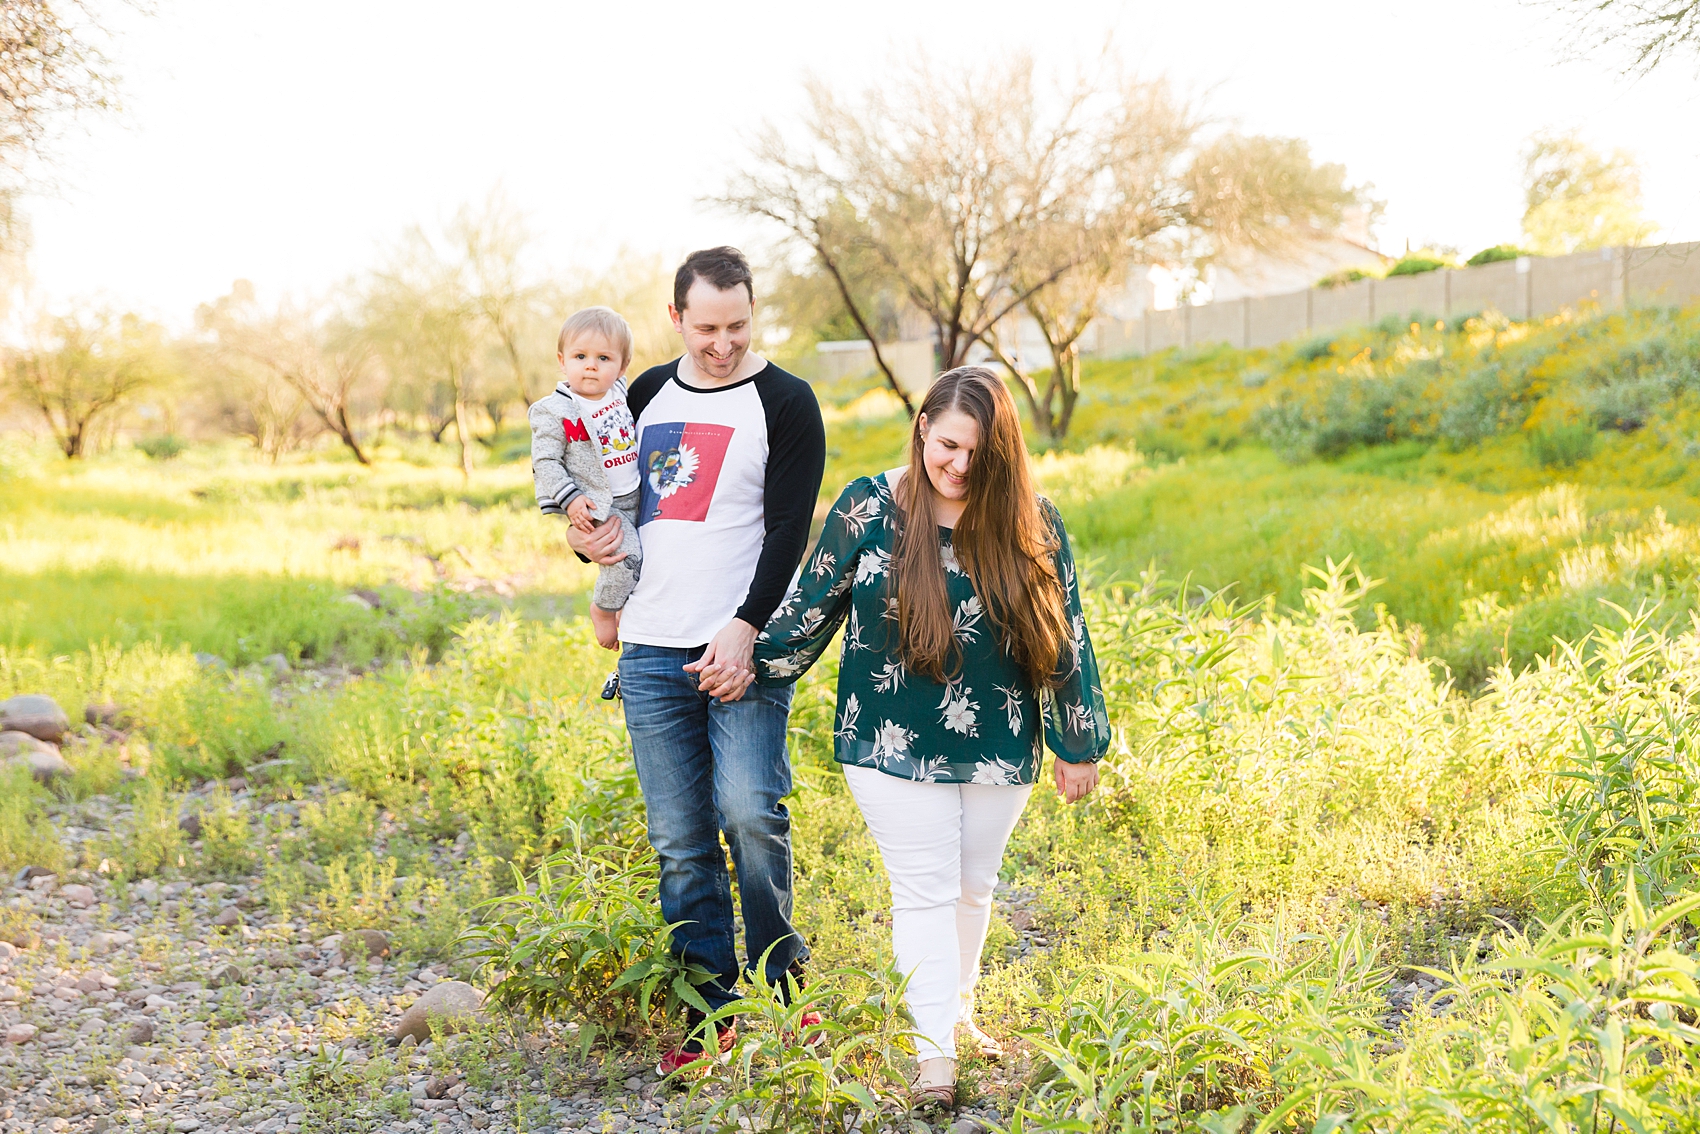 Leah Hope Photography | Scottsdale Phoenix Arizona Photographer | Downtown Phoenix | Family Photographer Family Photos | Green Nature Wash Location | Spring Pictures